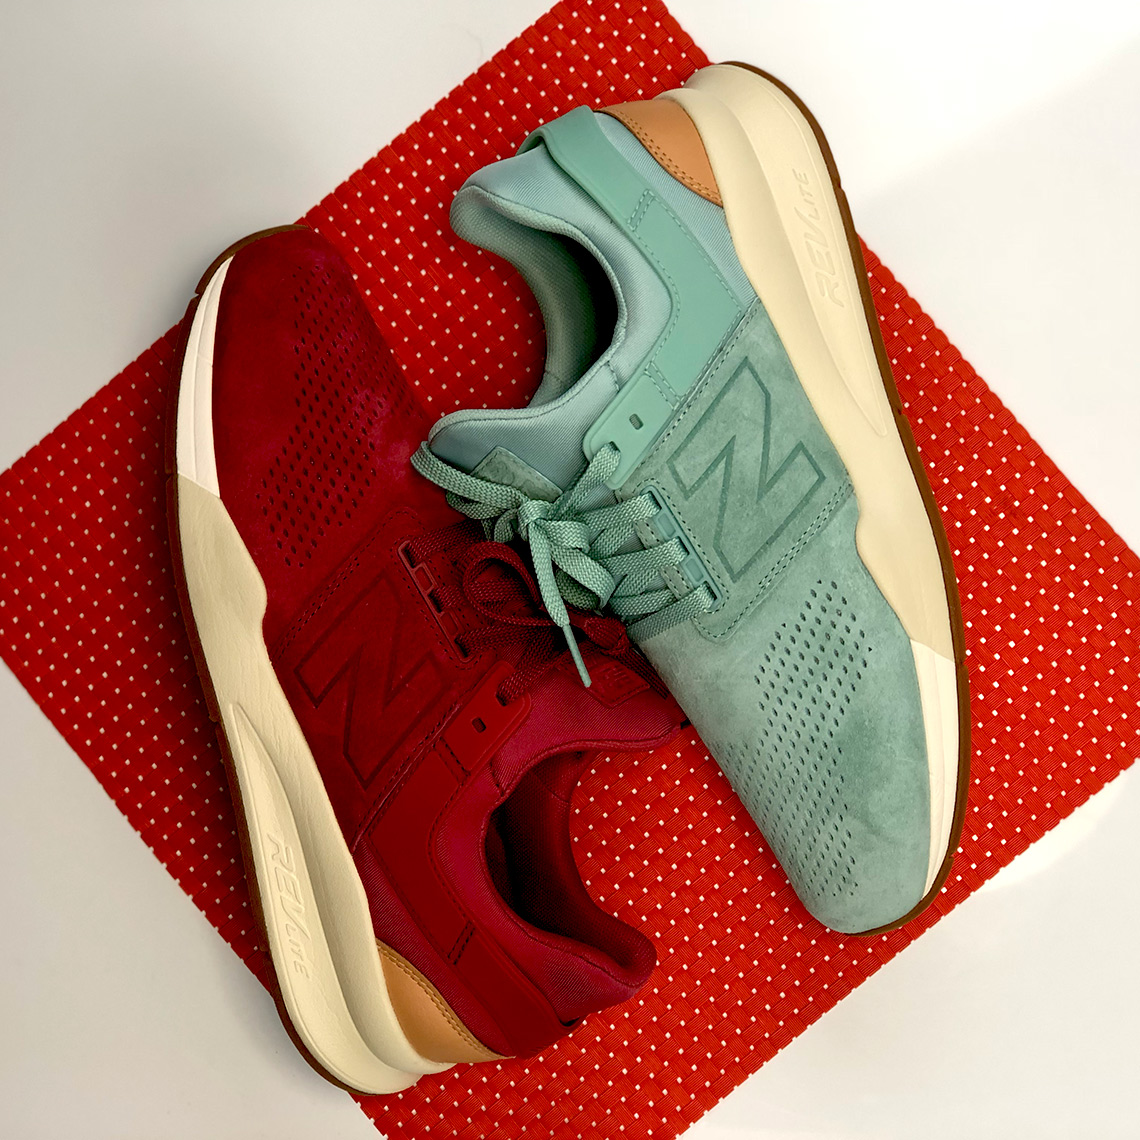 New Balance 247 V2 Suede Leather Tonal Pack 5